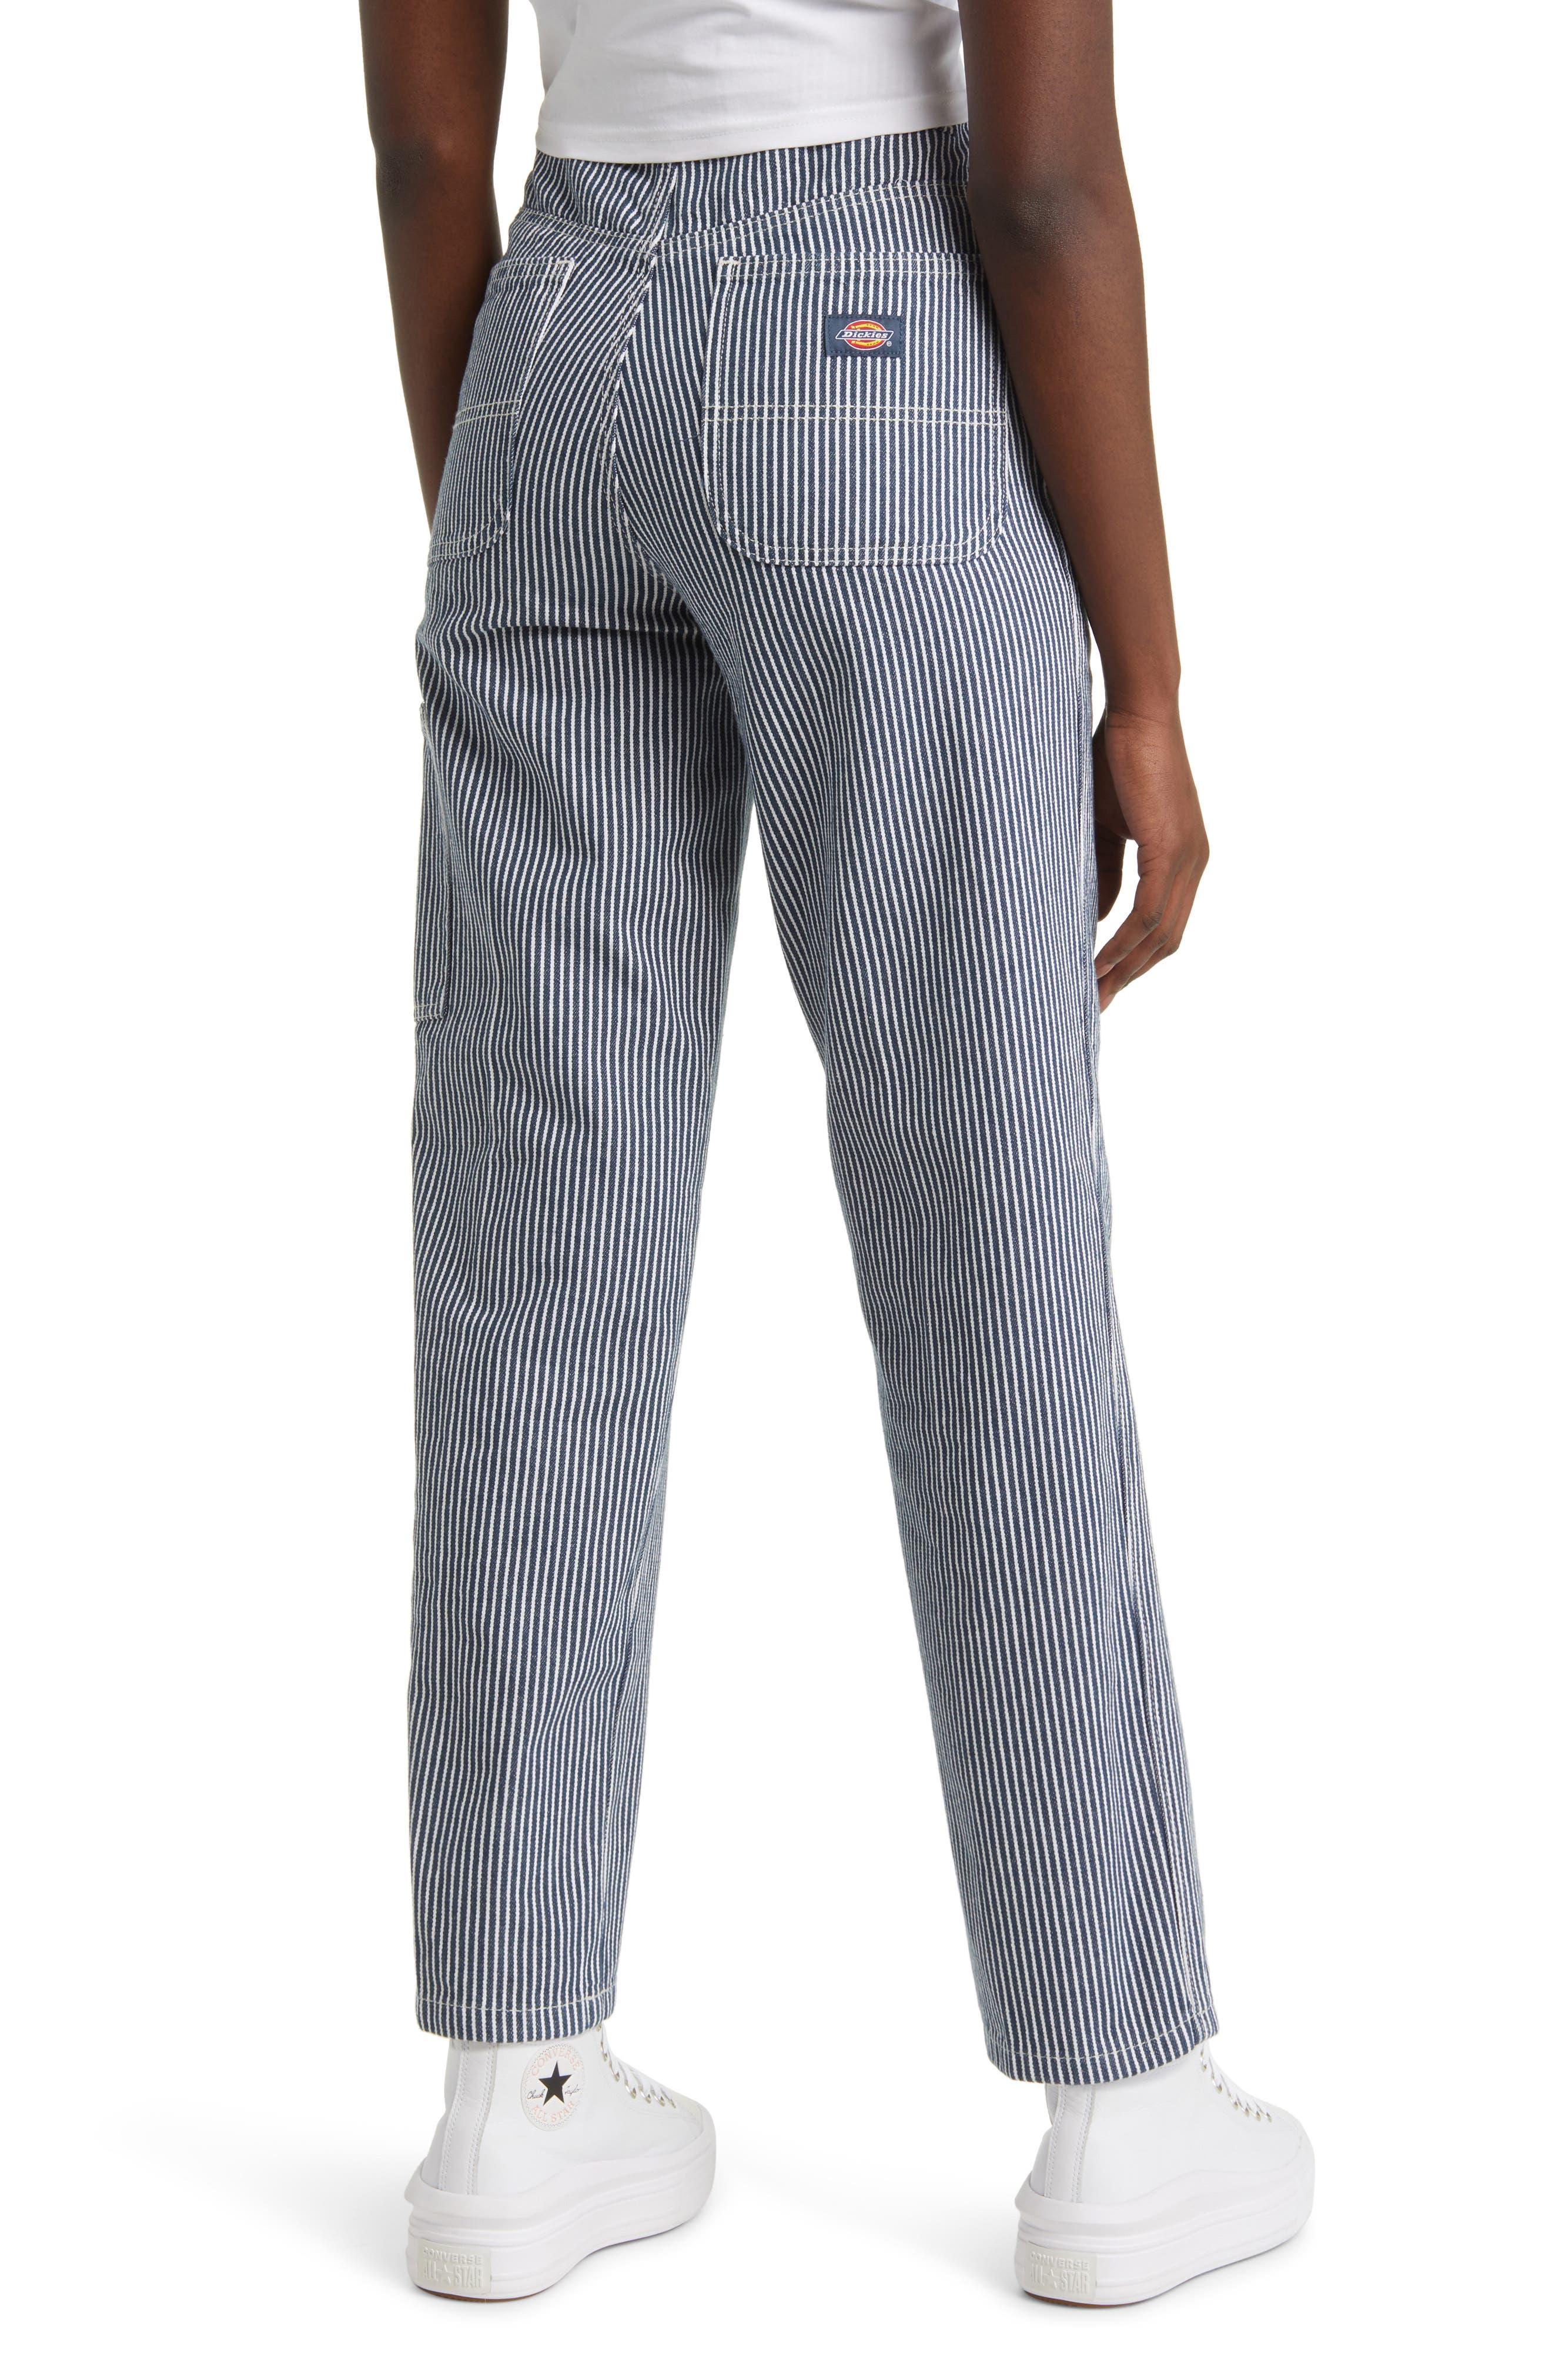 Dickies Hickory Stripe Cotton Twill Pants in Blue | Lyst